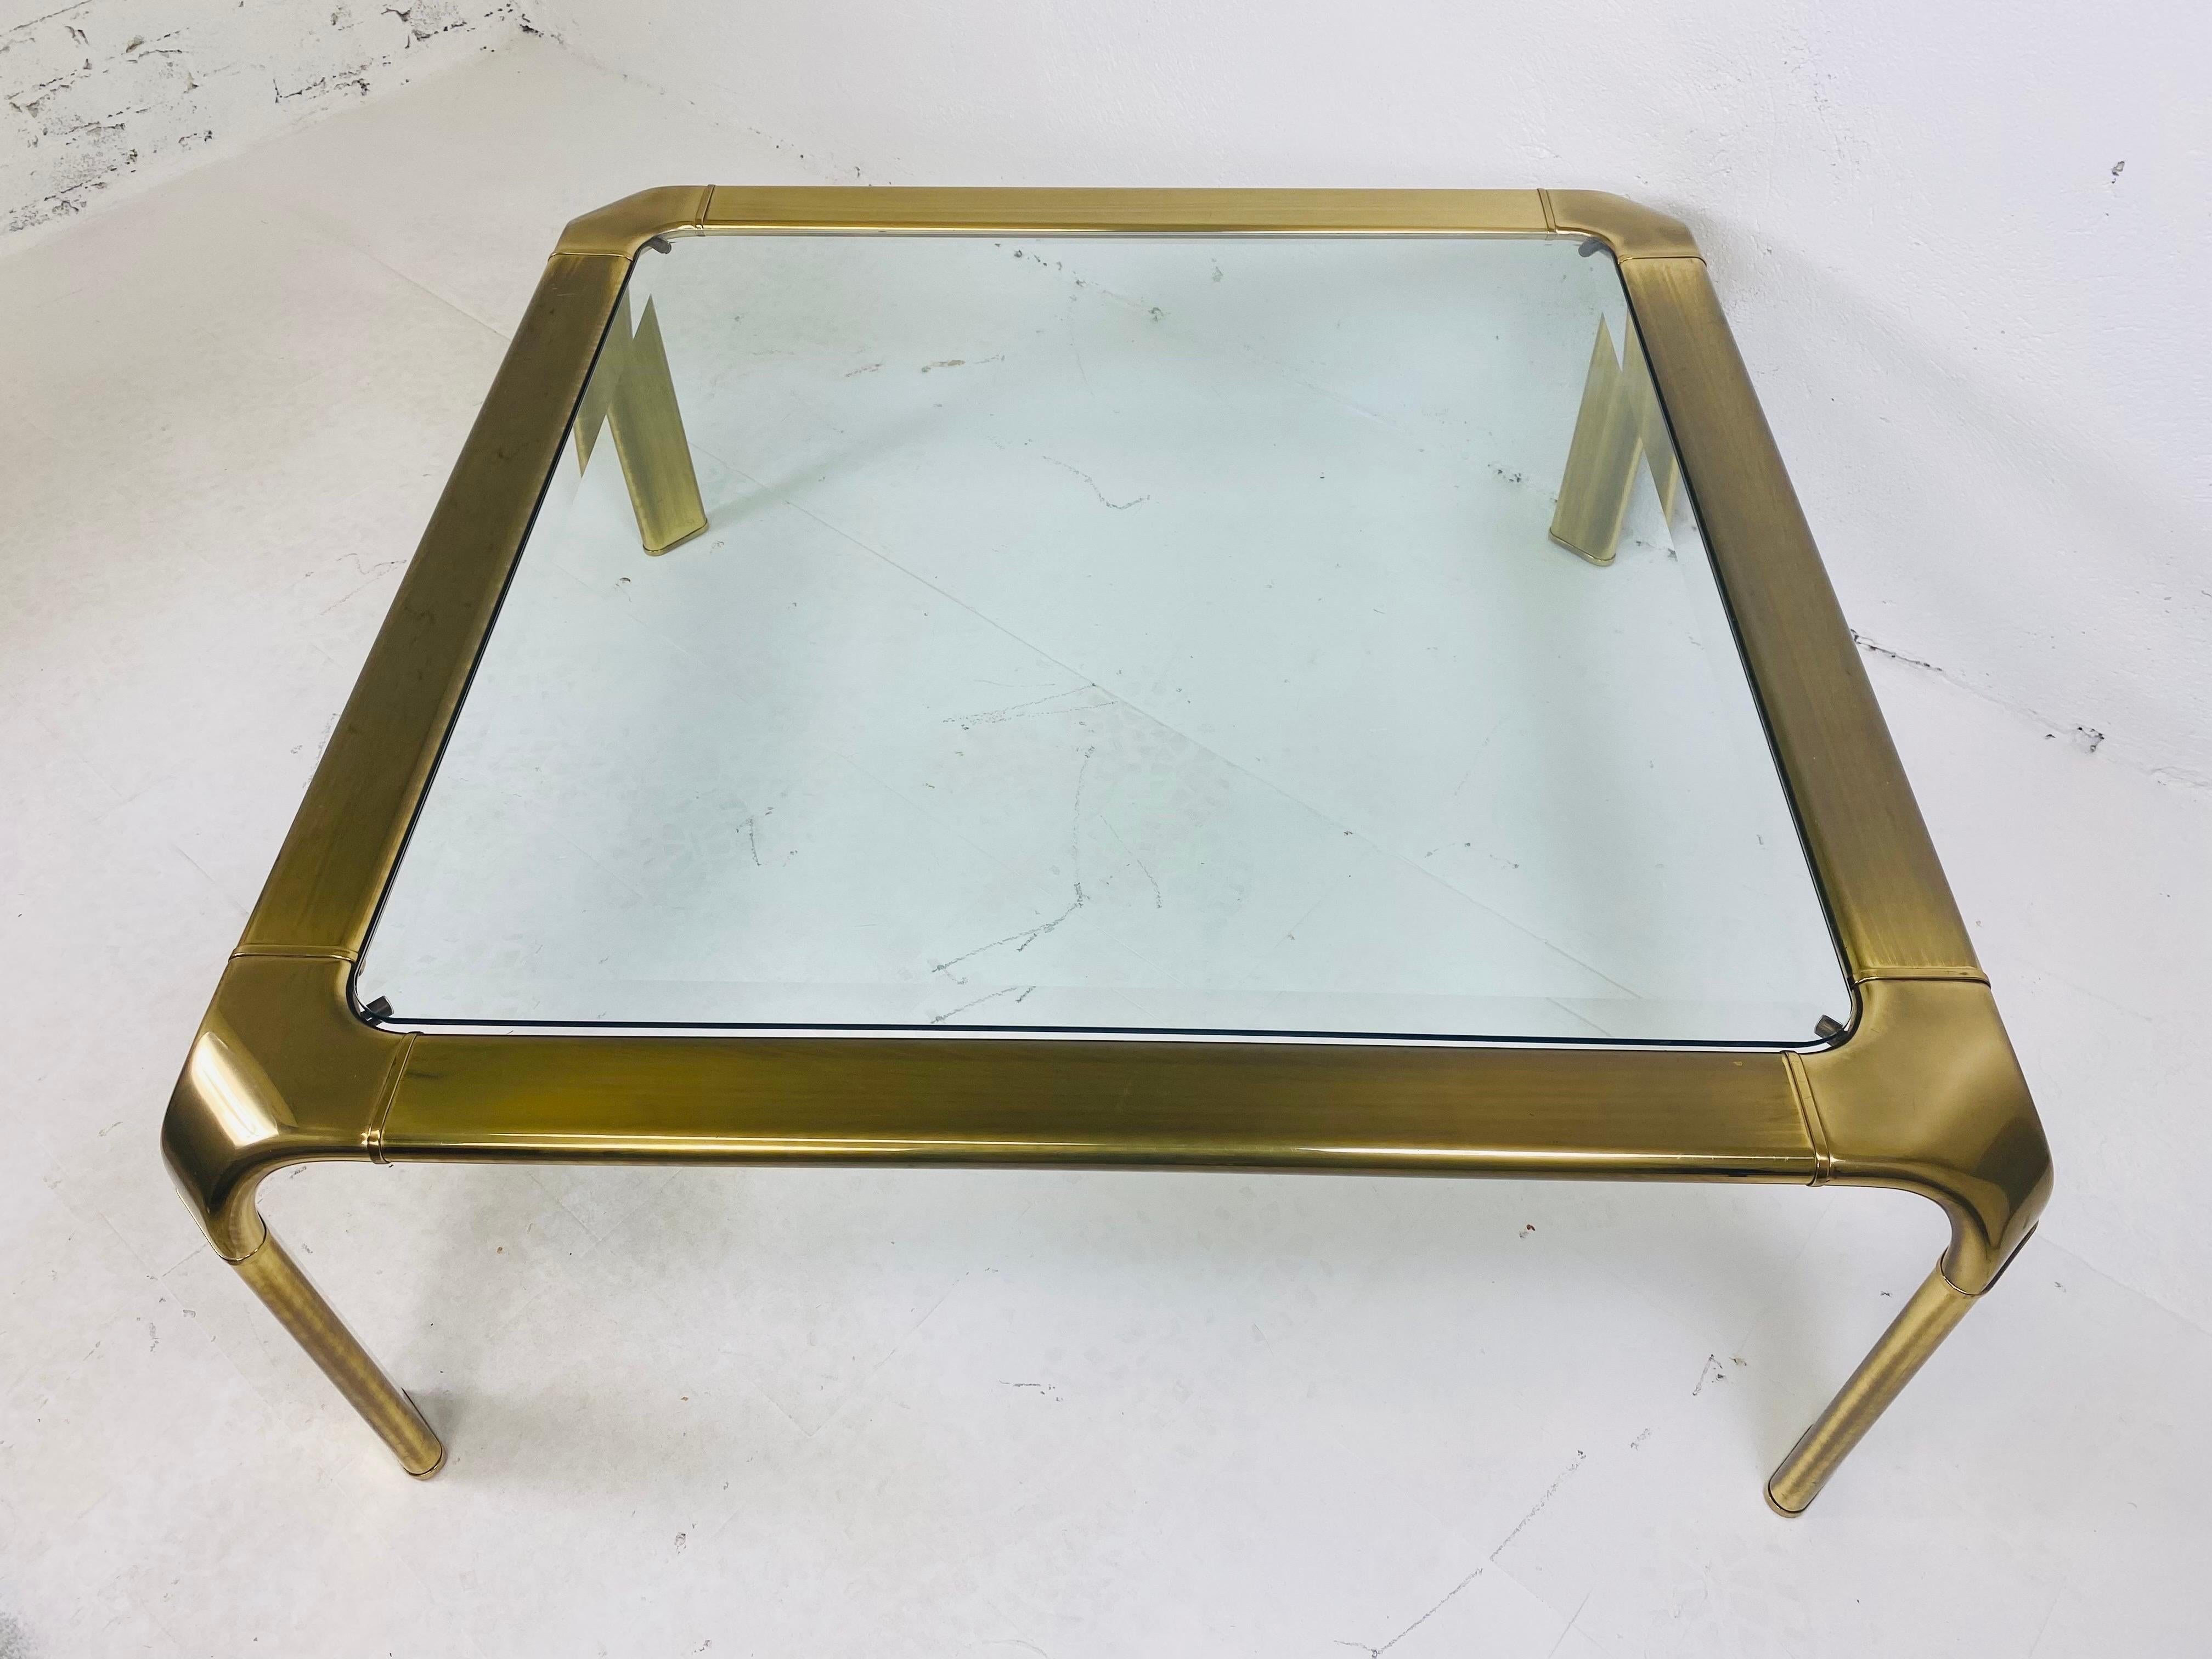 Elegant mid century solid brass cocktail table by Mastercraft In Good Condition For Sale In Allentown, PA